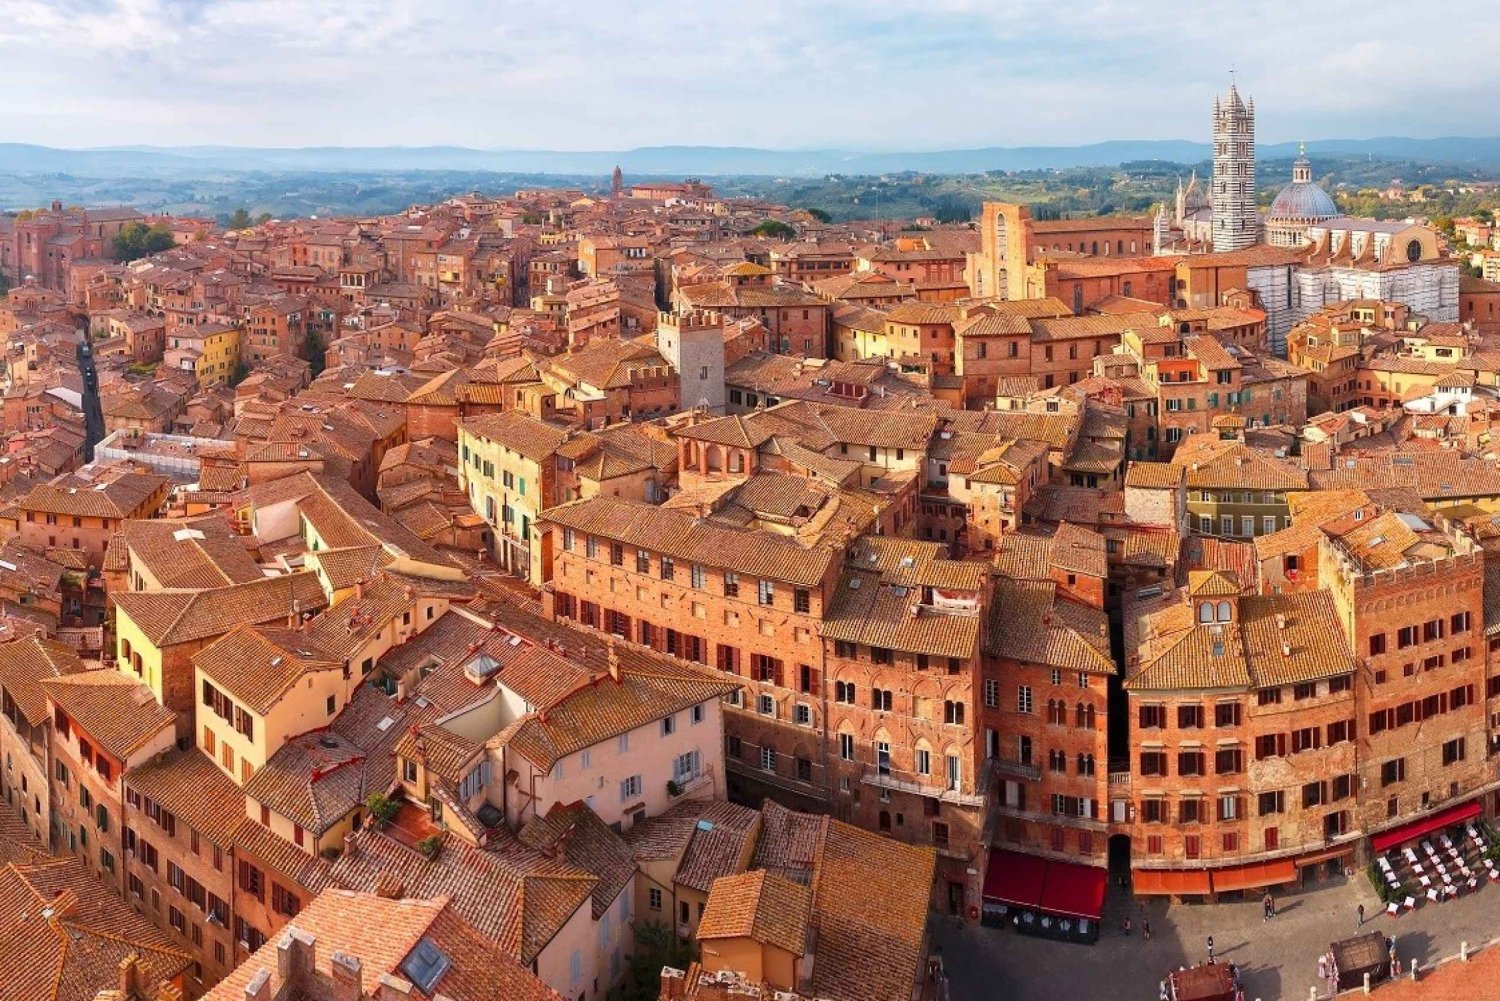 From Florence: Tuscany Day Trip with a Private Chauffeur